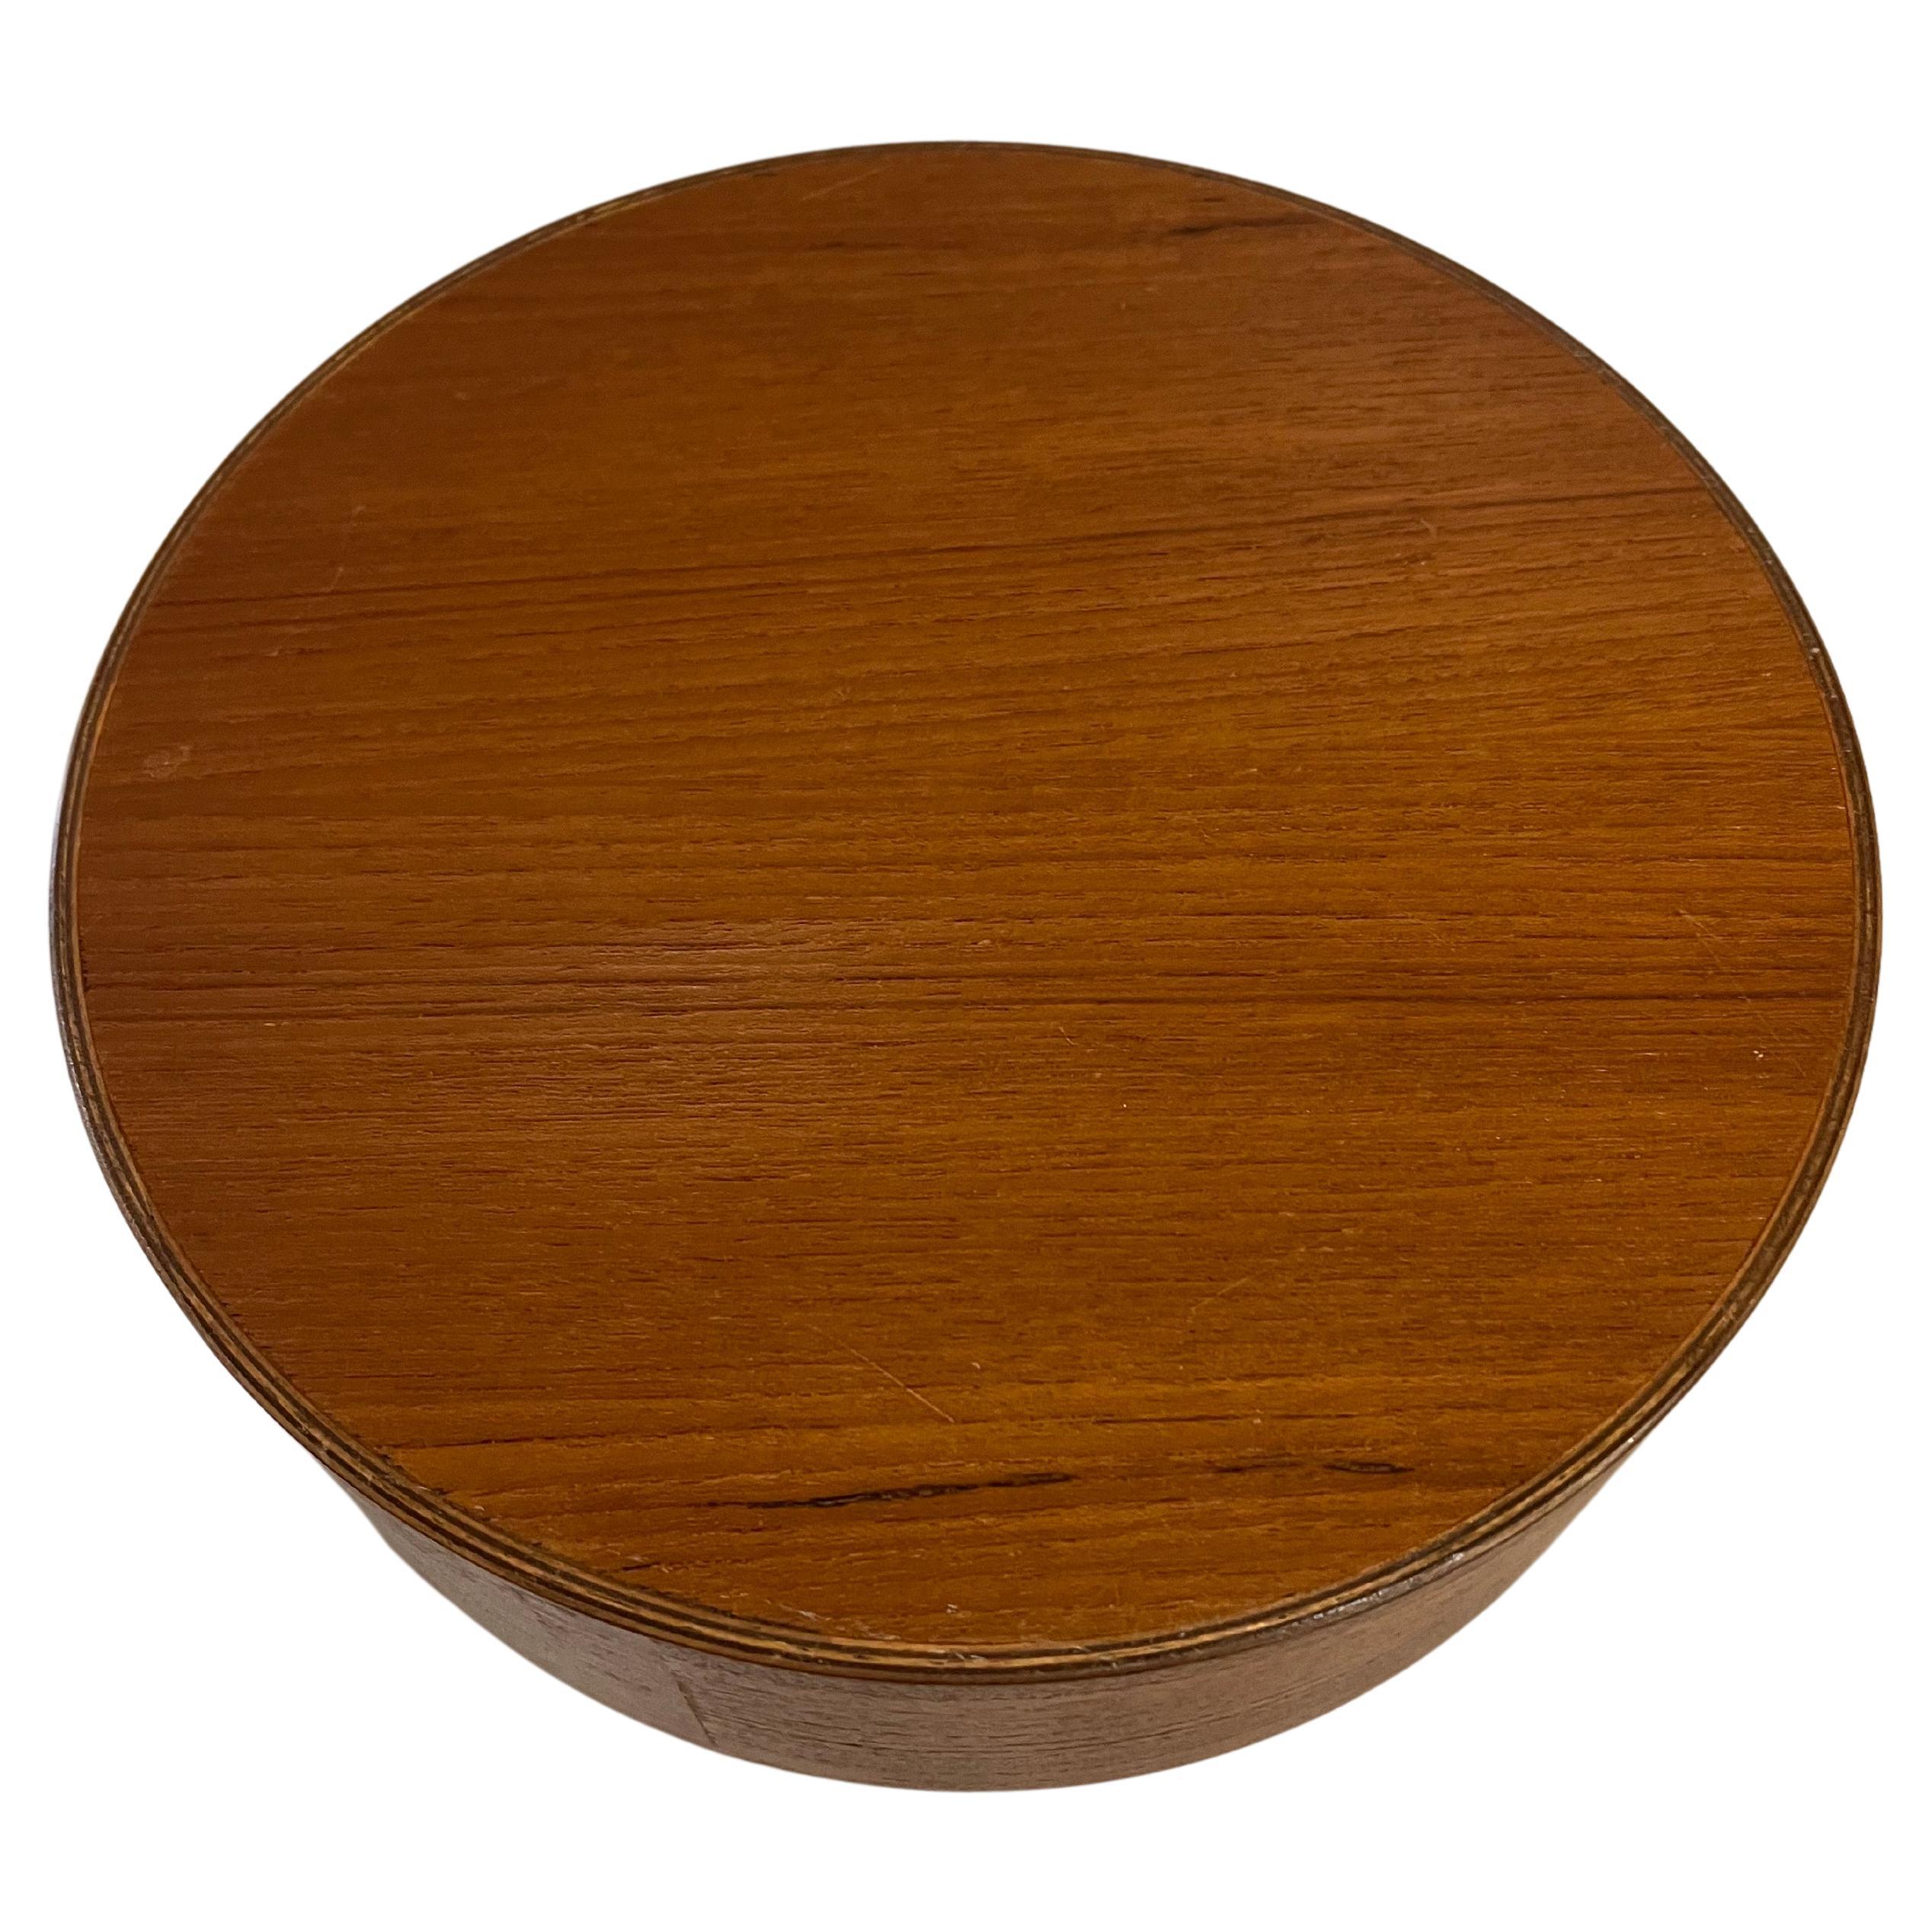 Elegant straight edge wall teak bowl Catch it all , circa 1950's beautiful condition great craftsmanship can be used as center piece.